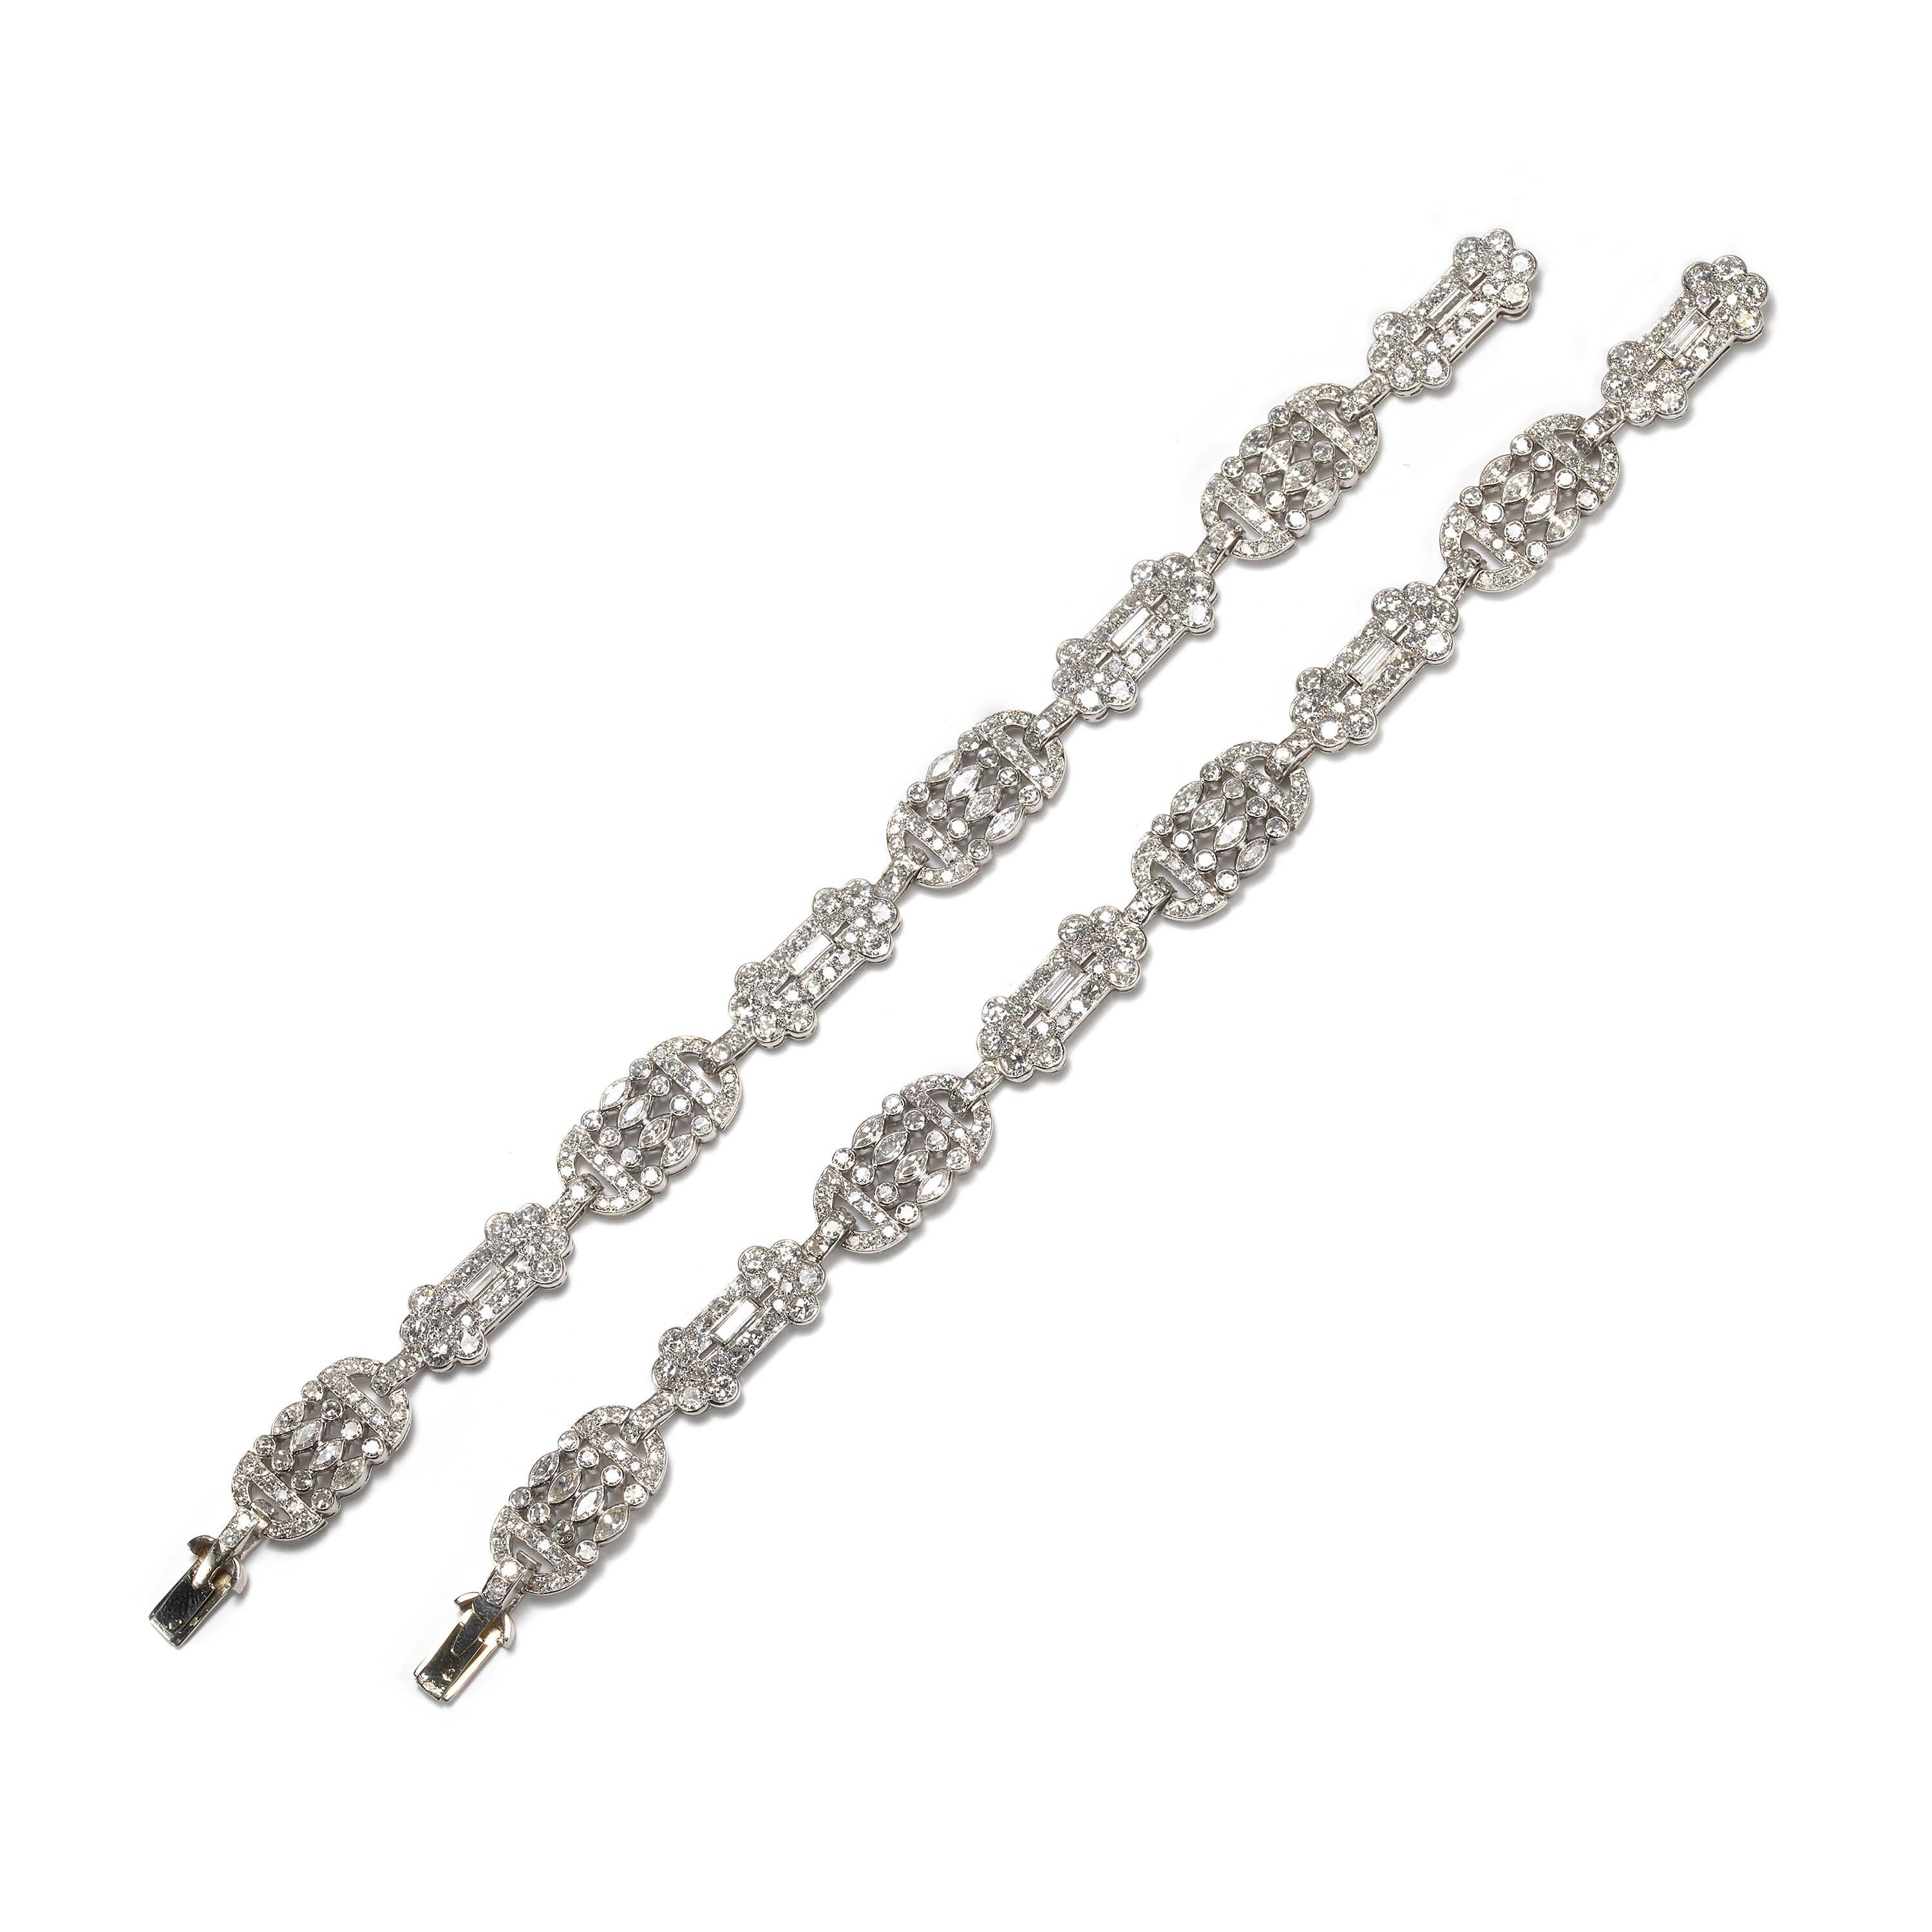 Women's Early 20th Century French Diamond Necklace or Bracelets For Sale